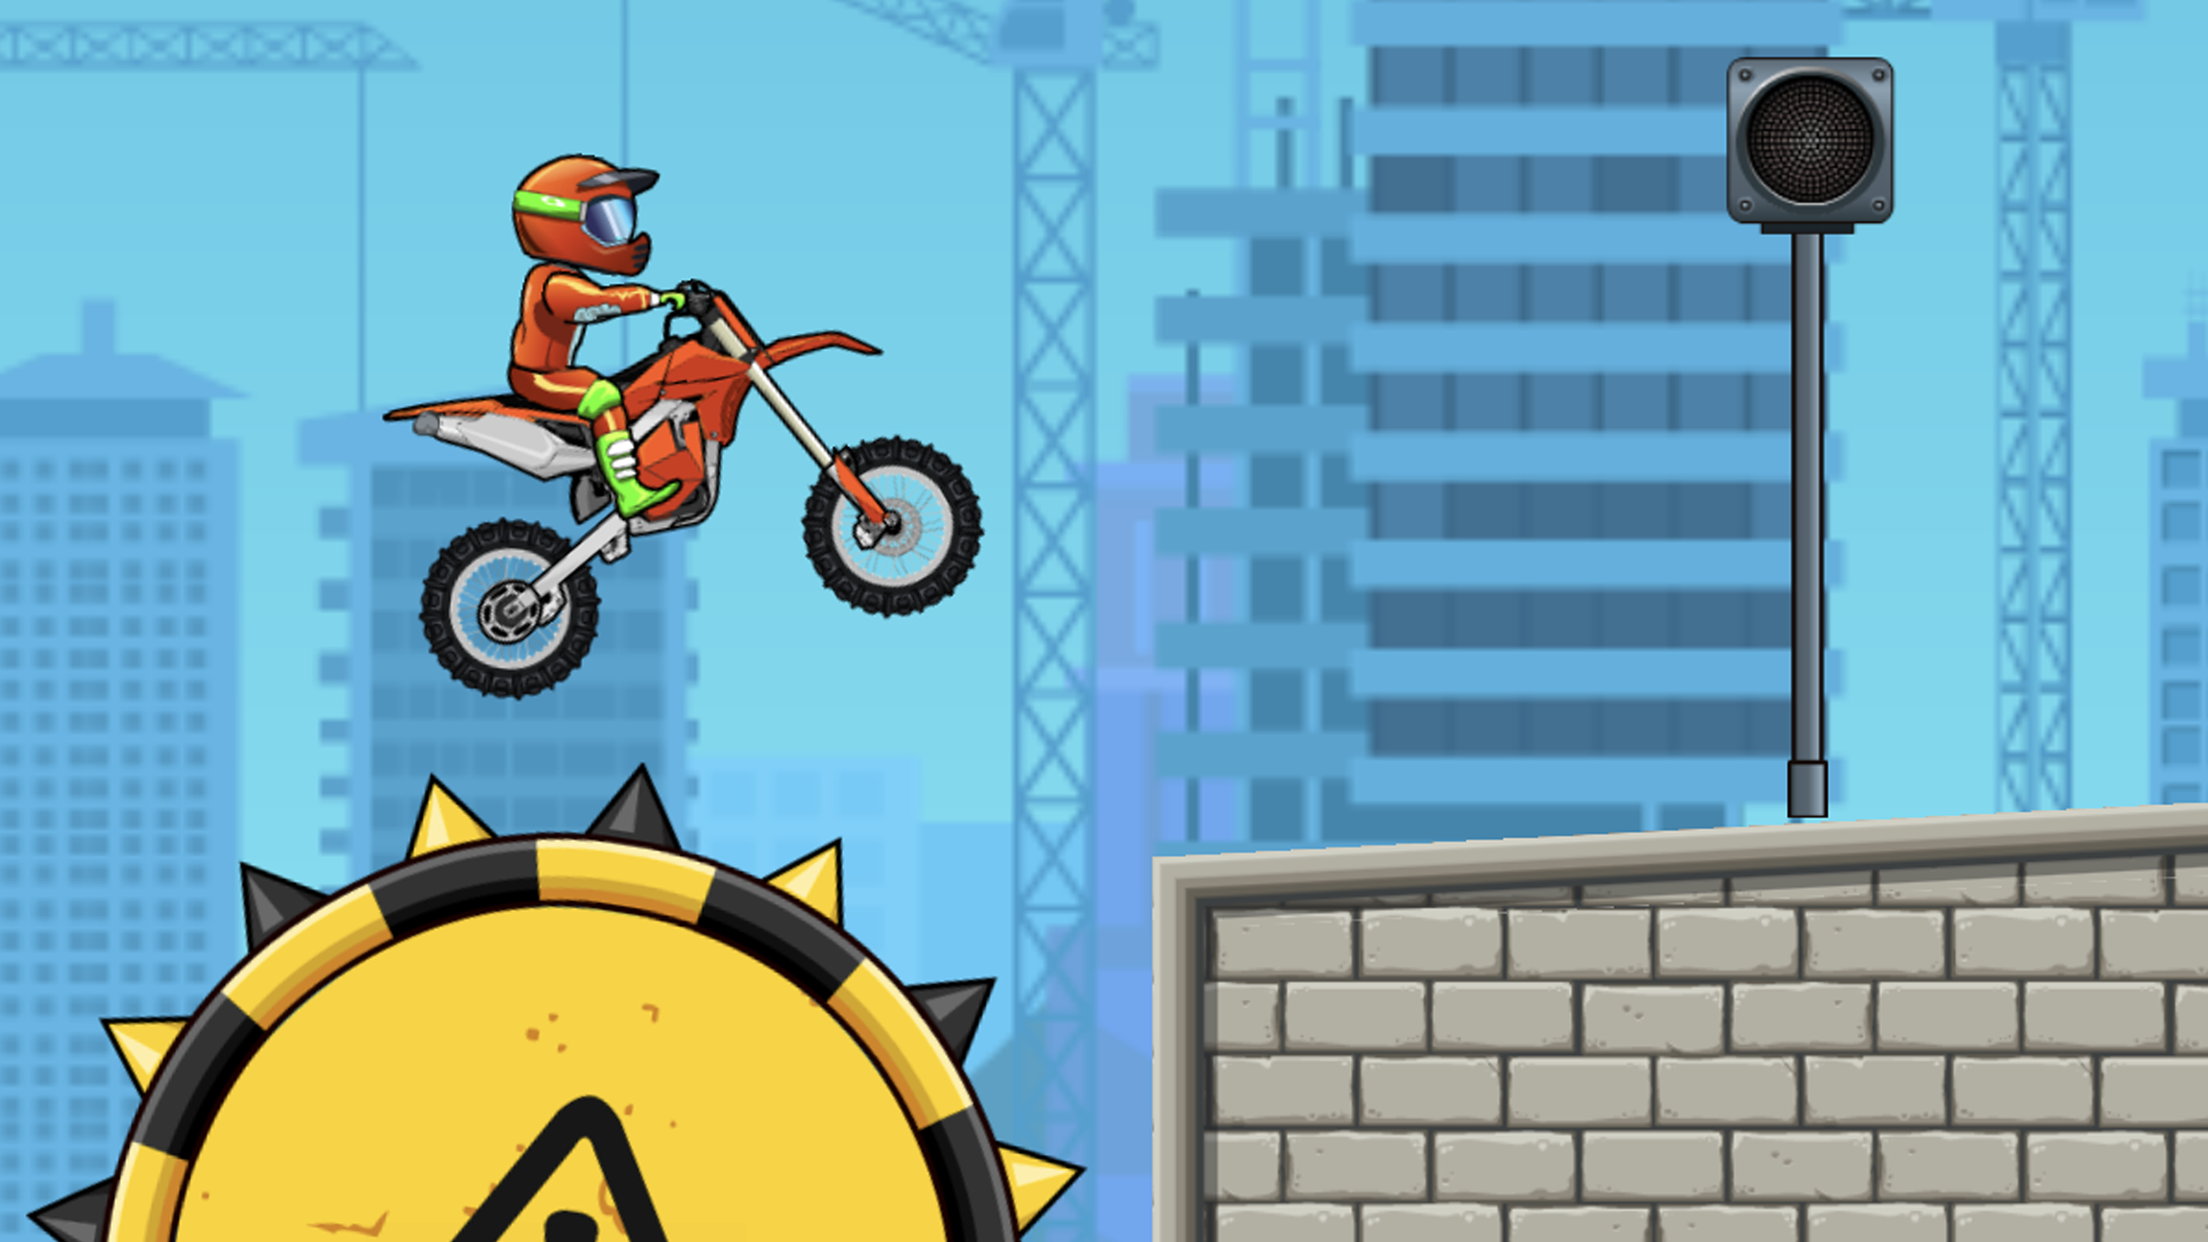 Moto X3M 2 is the most addictive racing game you will play this year